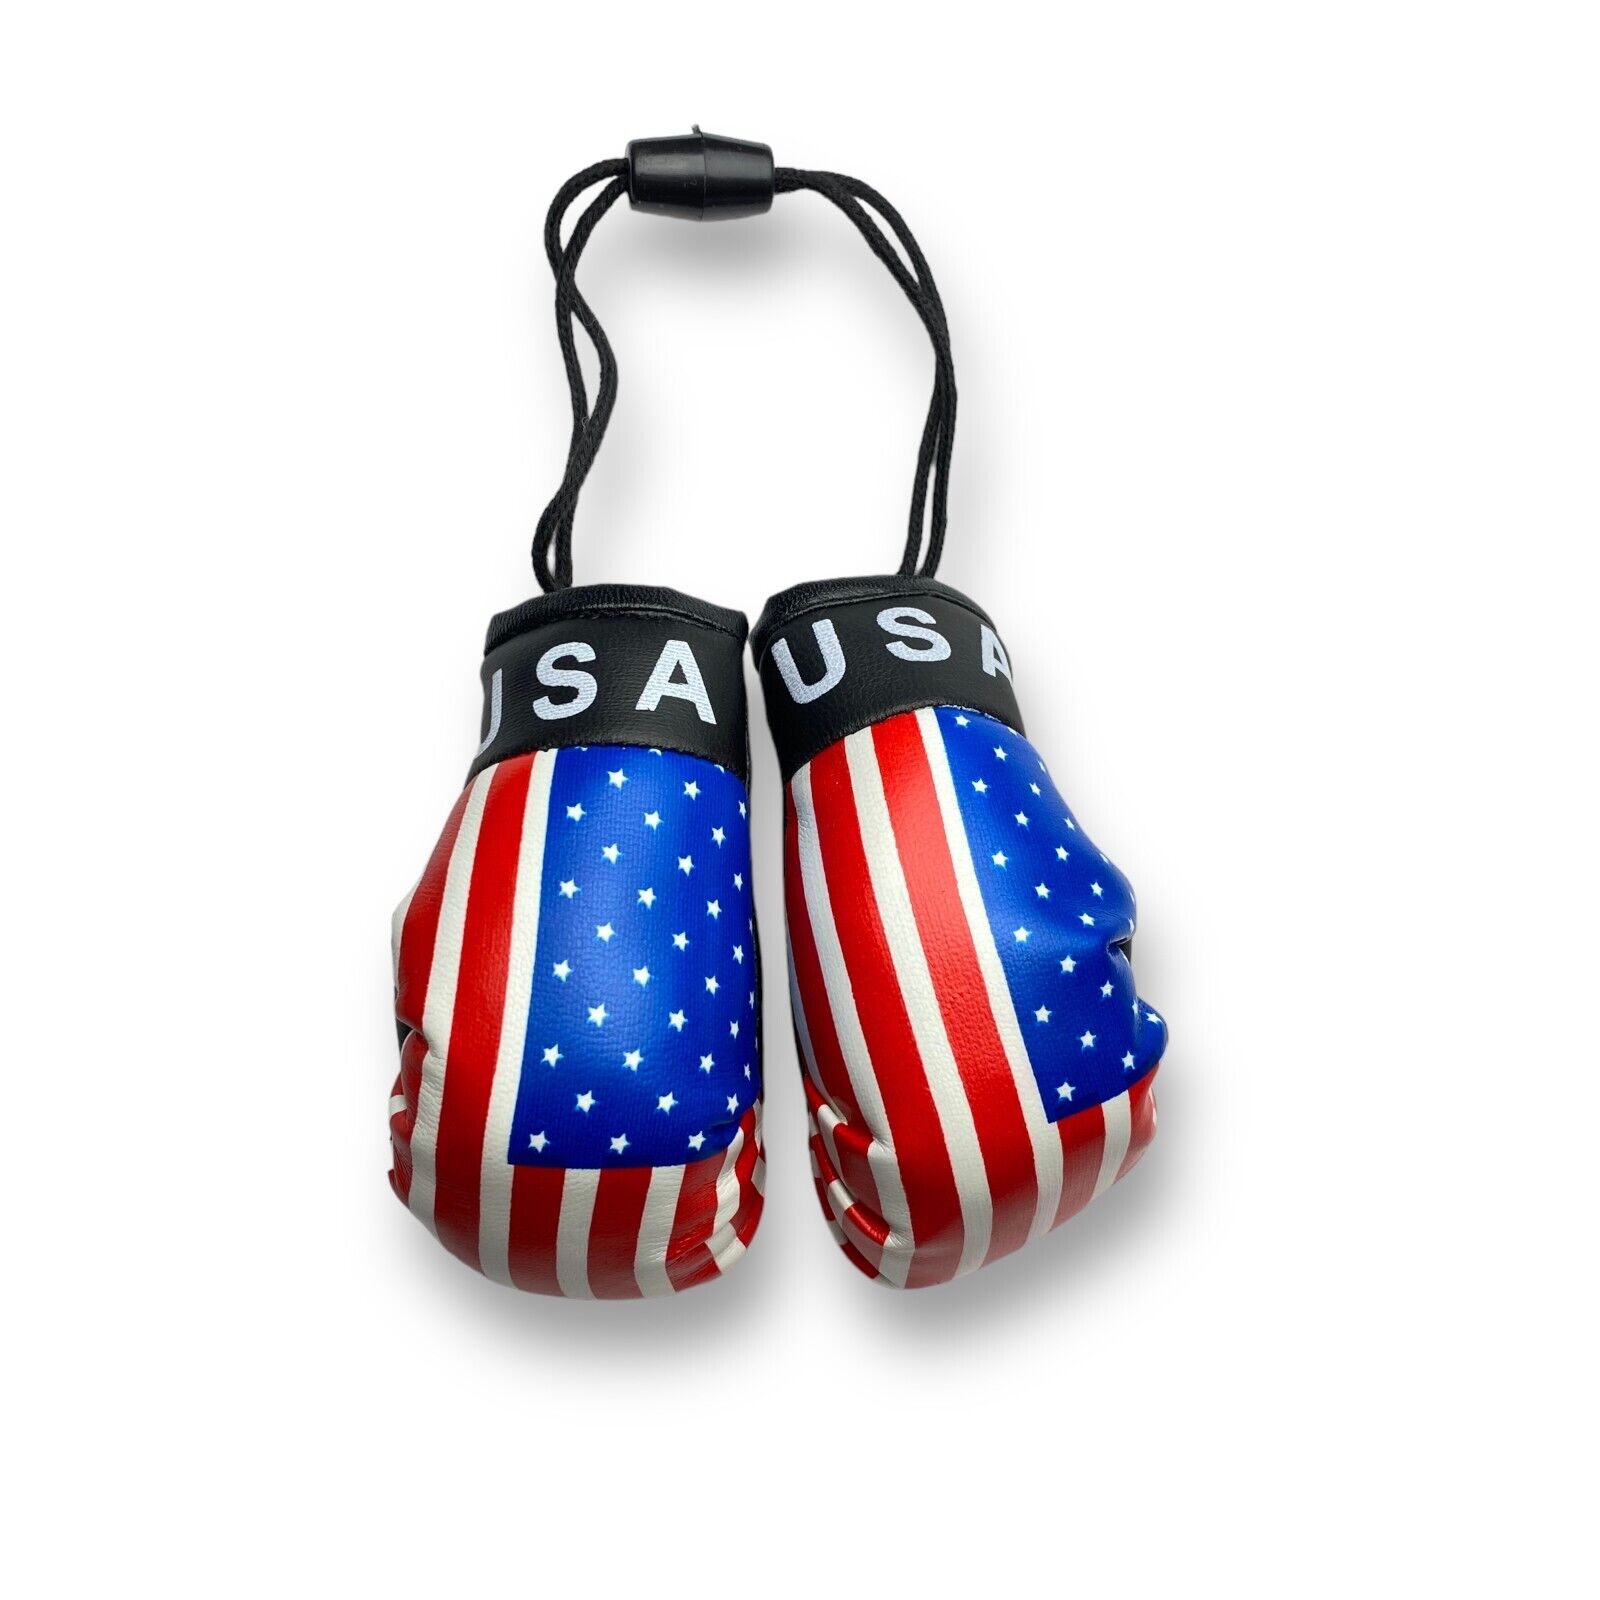 Mini Boxing Gloves with U.S.A Flag - Ideal for Displaying as Car Rearview Mirror